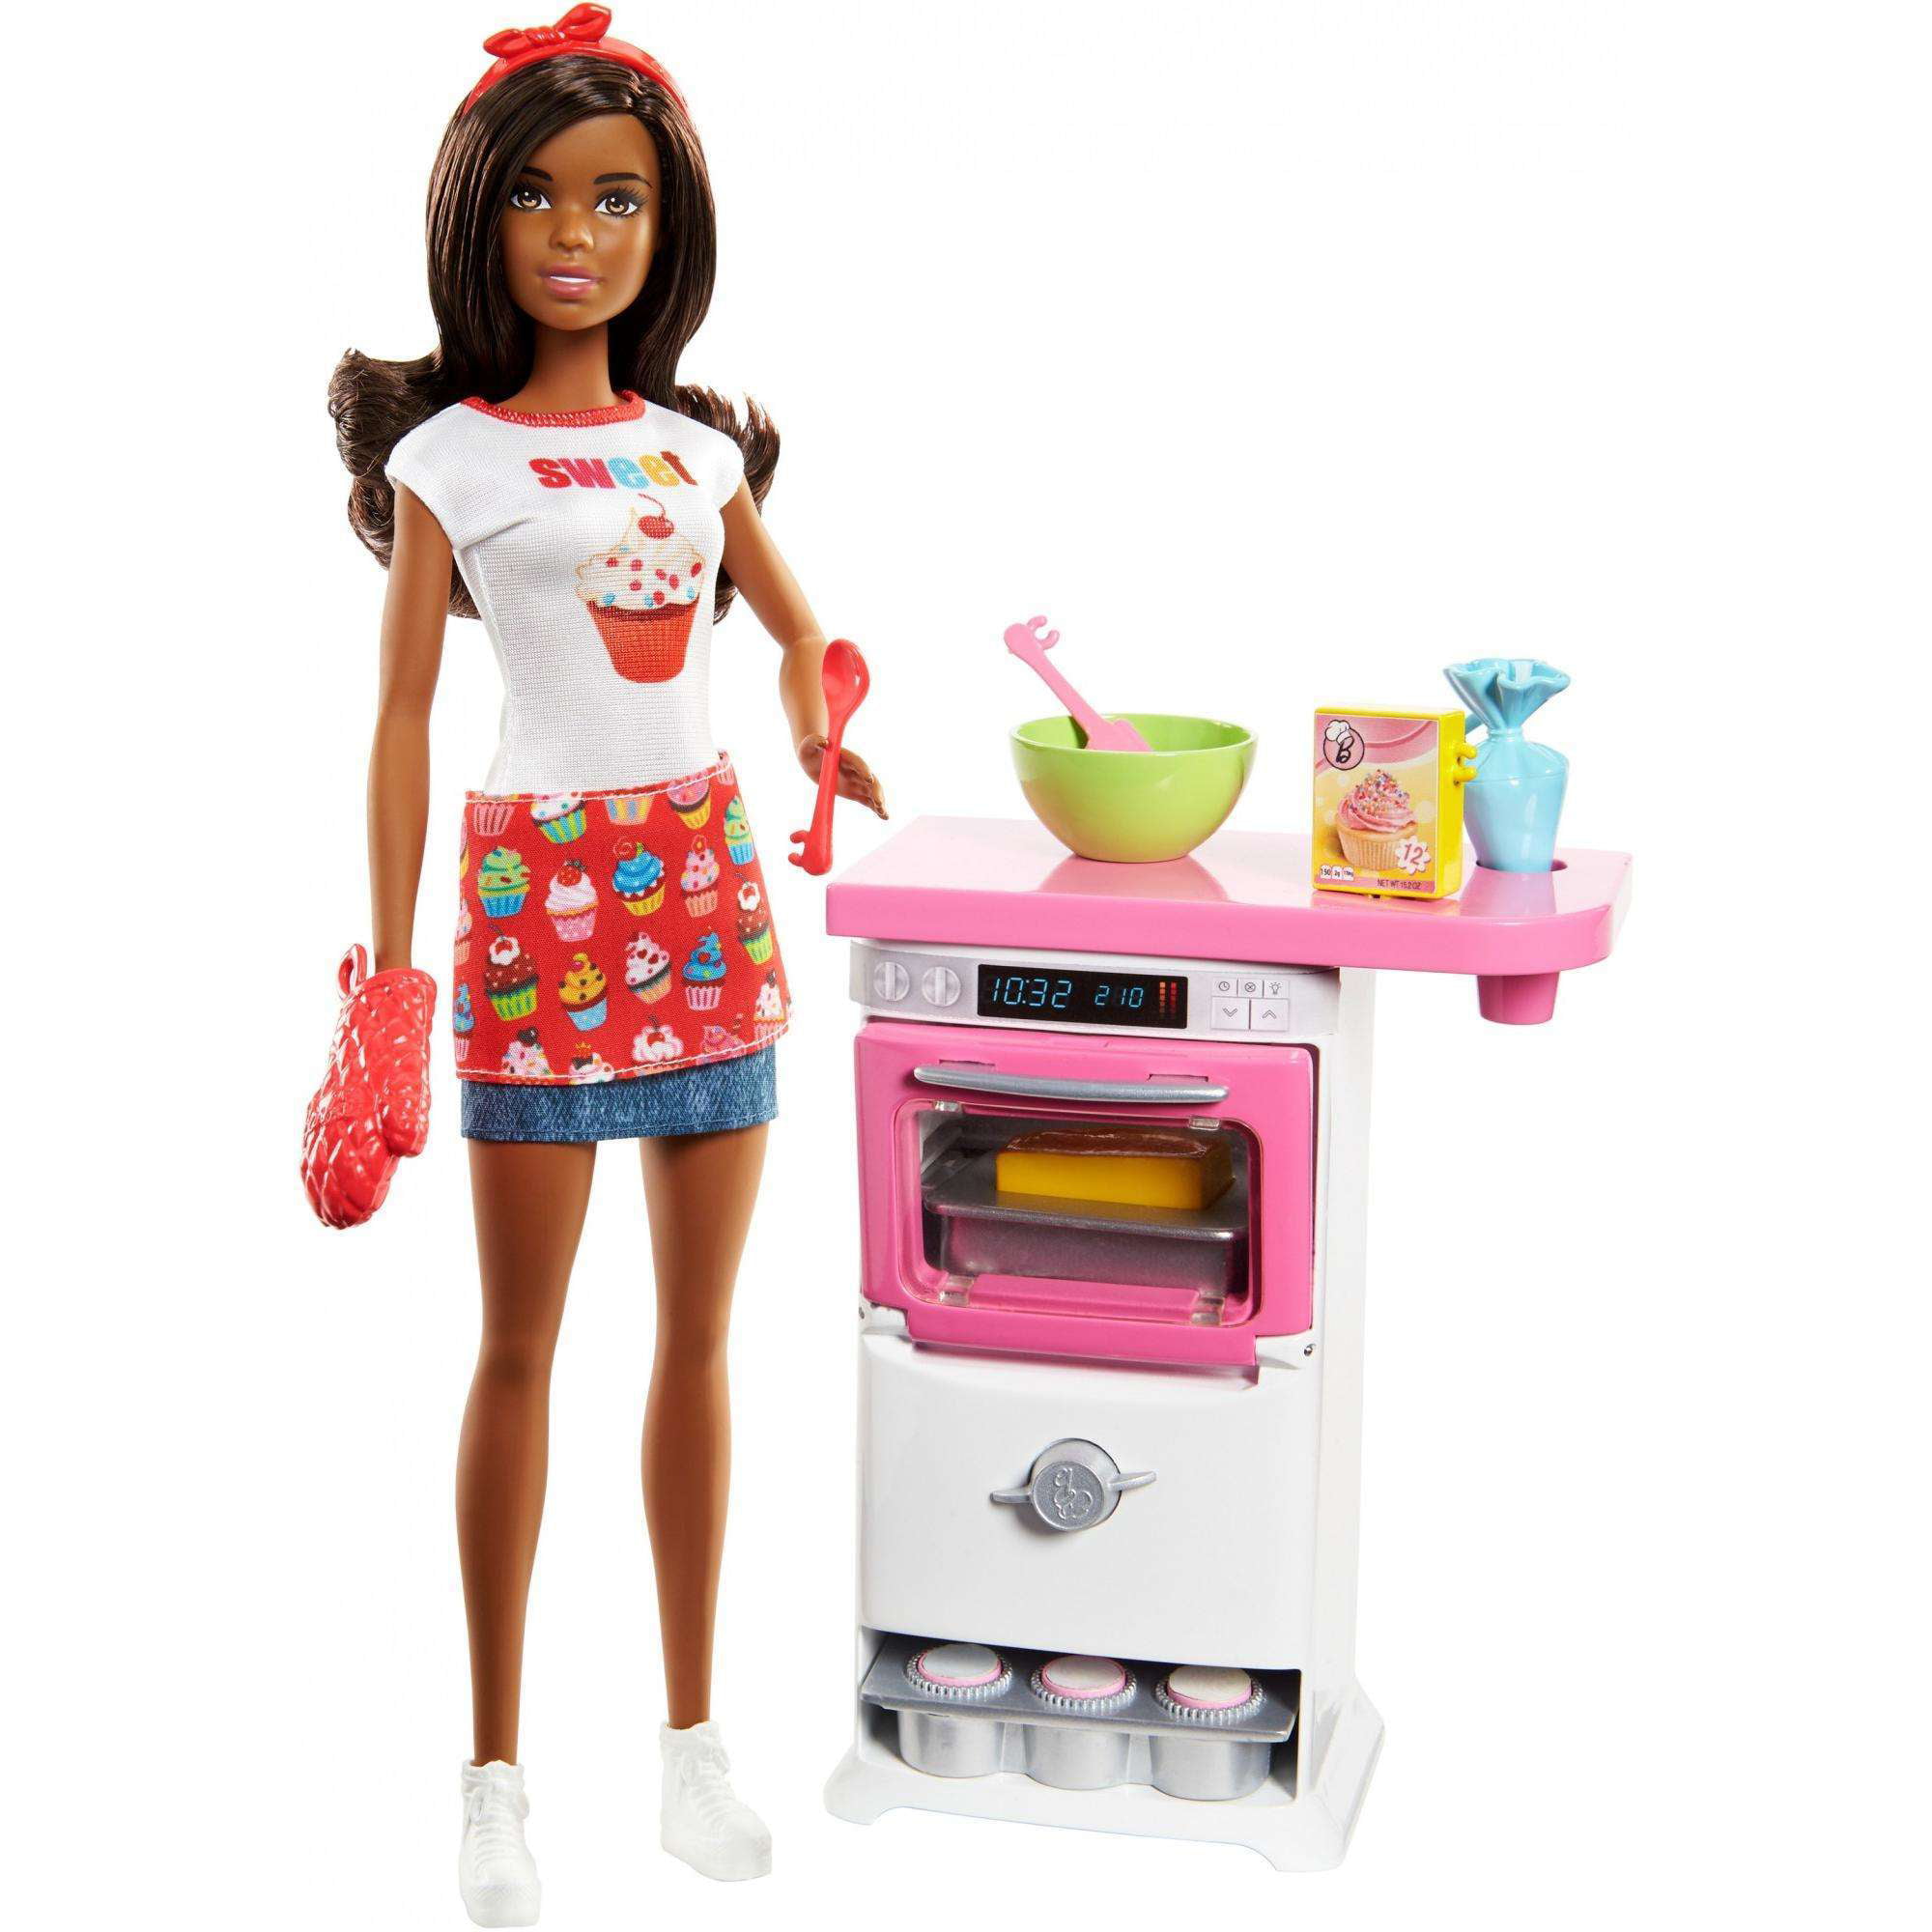  Barbie  Cooking  Baking Chef Storytelling Doll and Play 